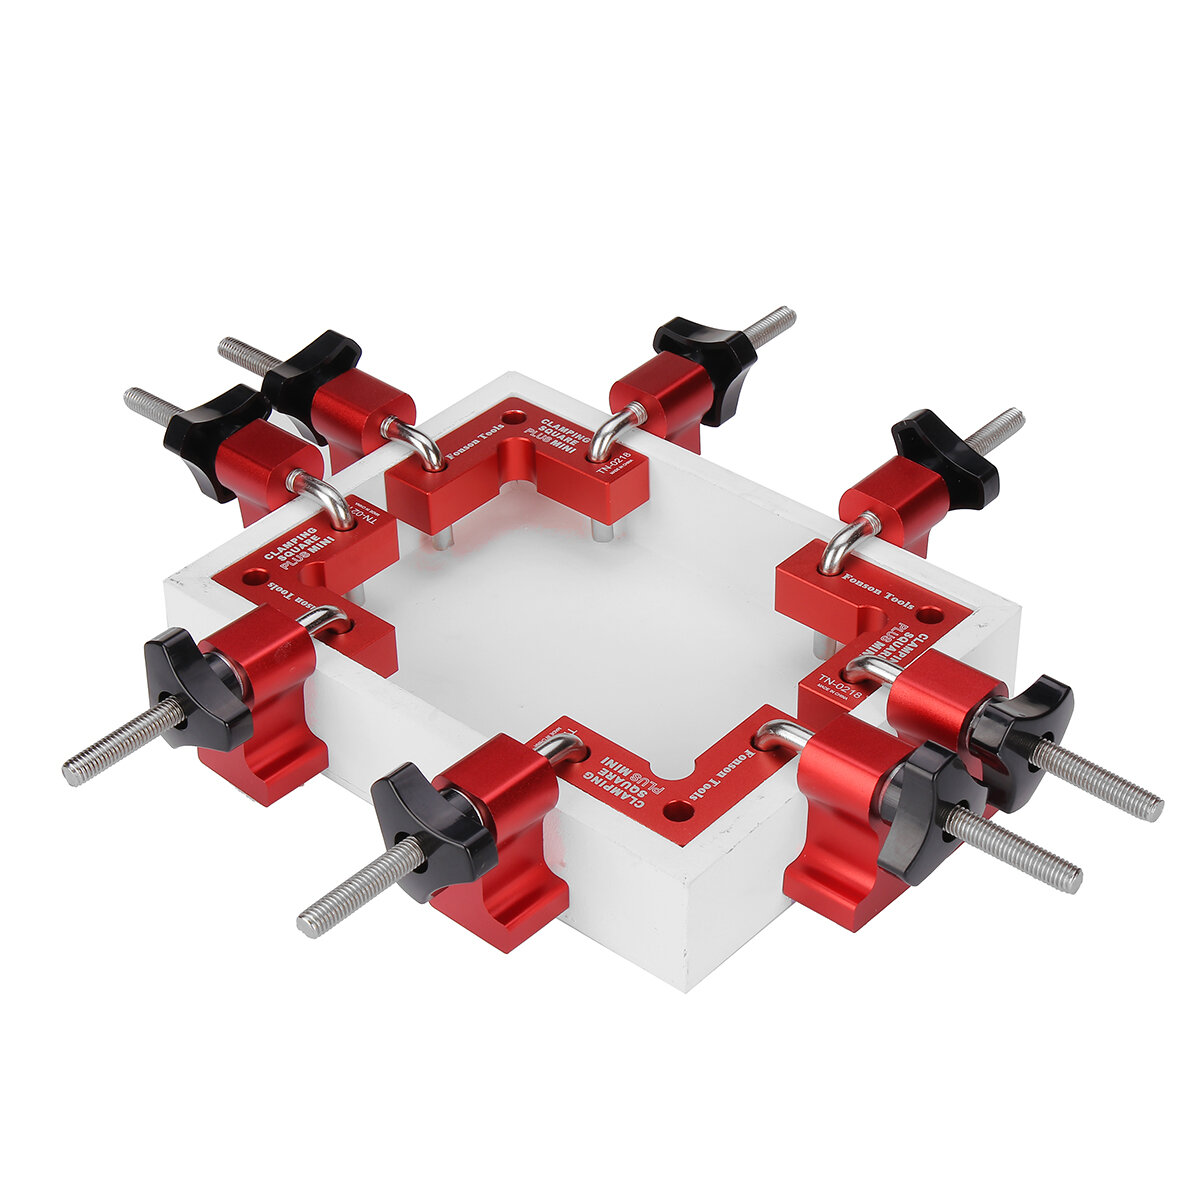 best price,fonson,set,mini,woodworking,angle,positioning,clamp,eu,discount